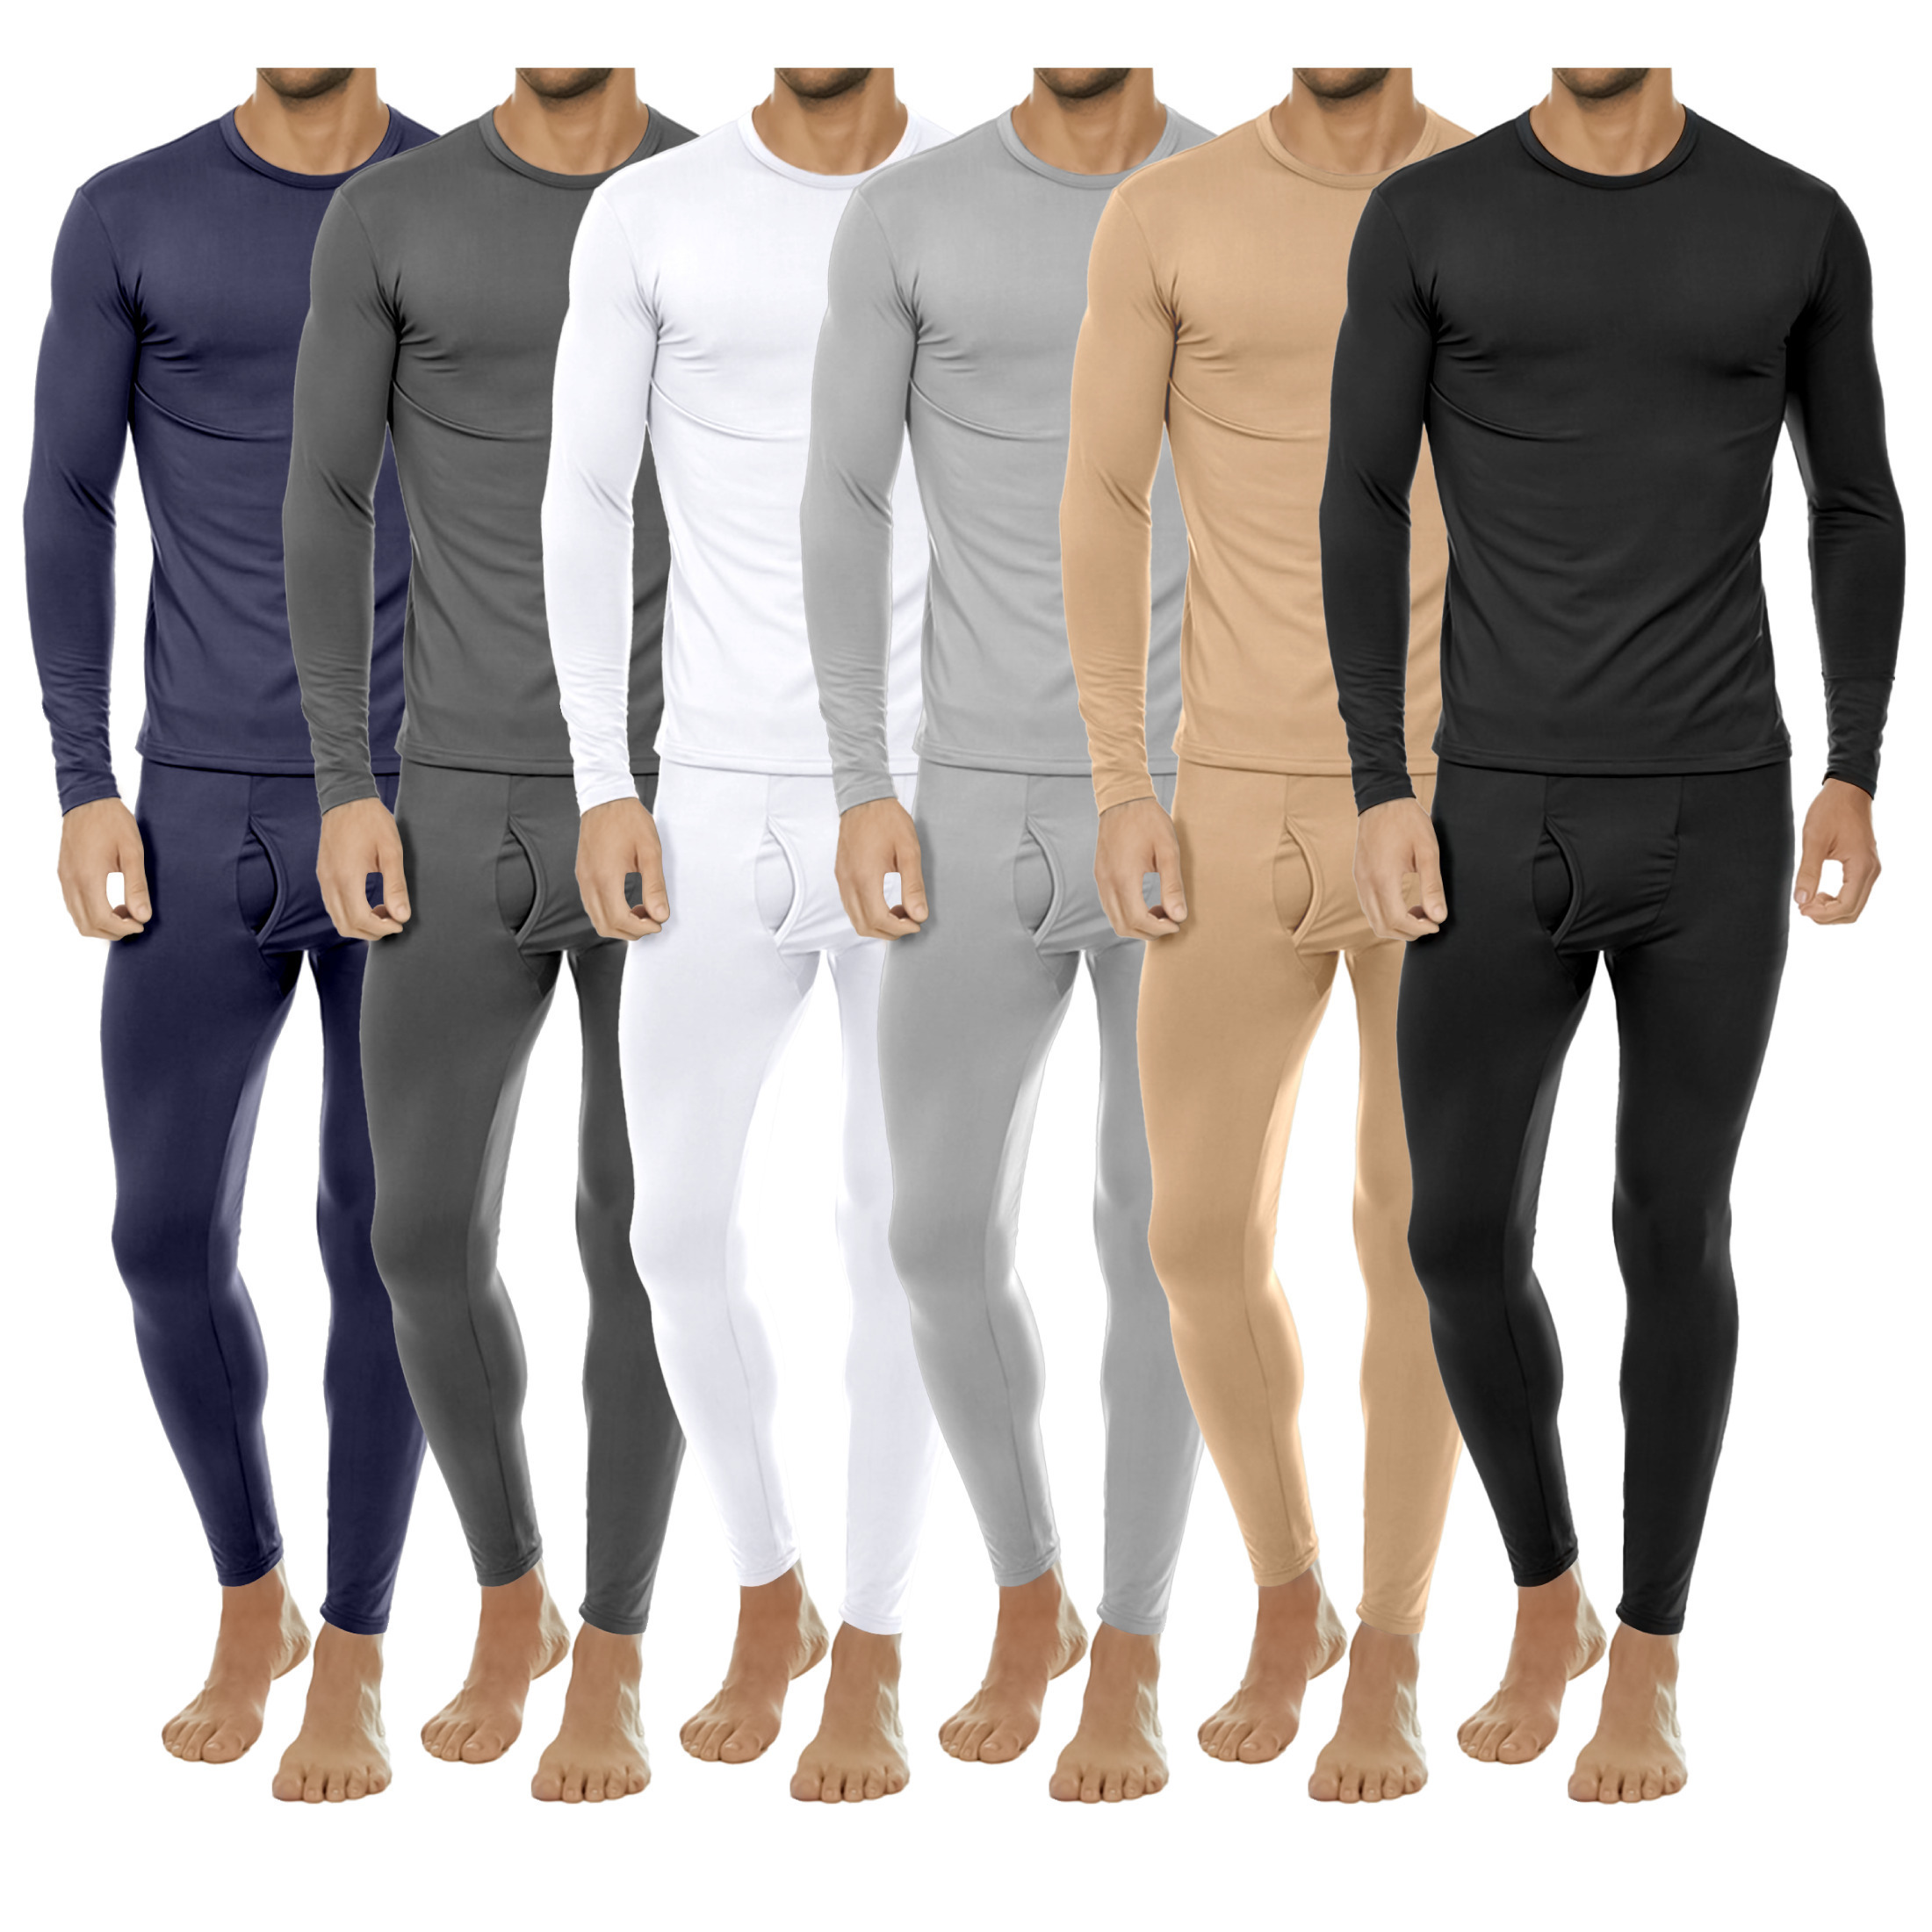 4-Piece: Men's Fleece Lined Thermal Set For Cold Weather - Small